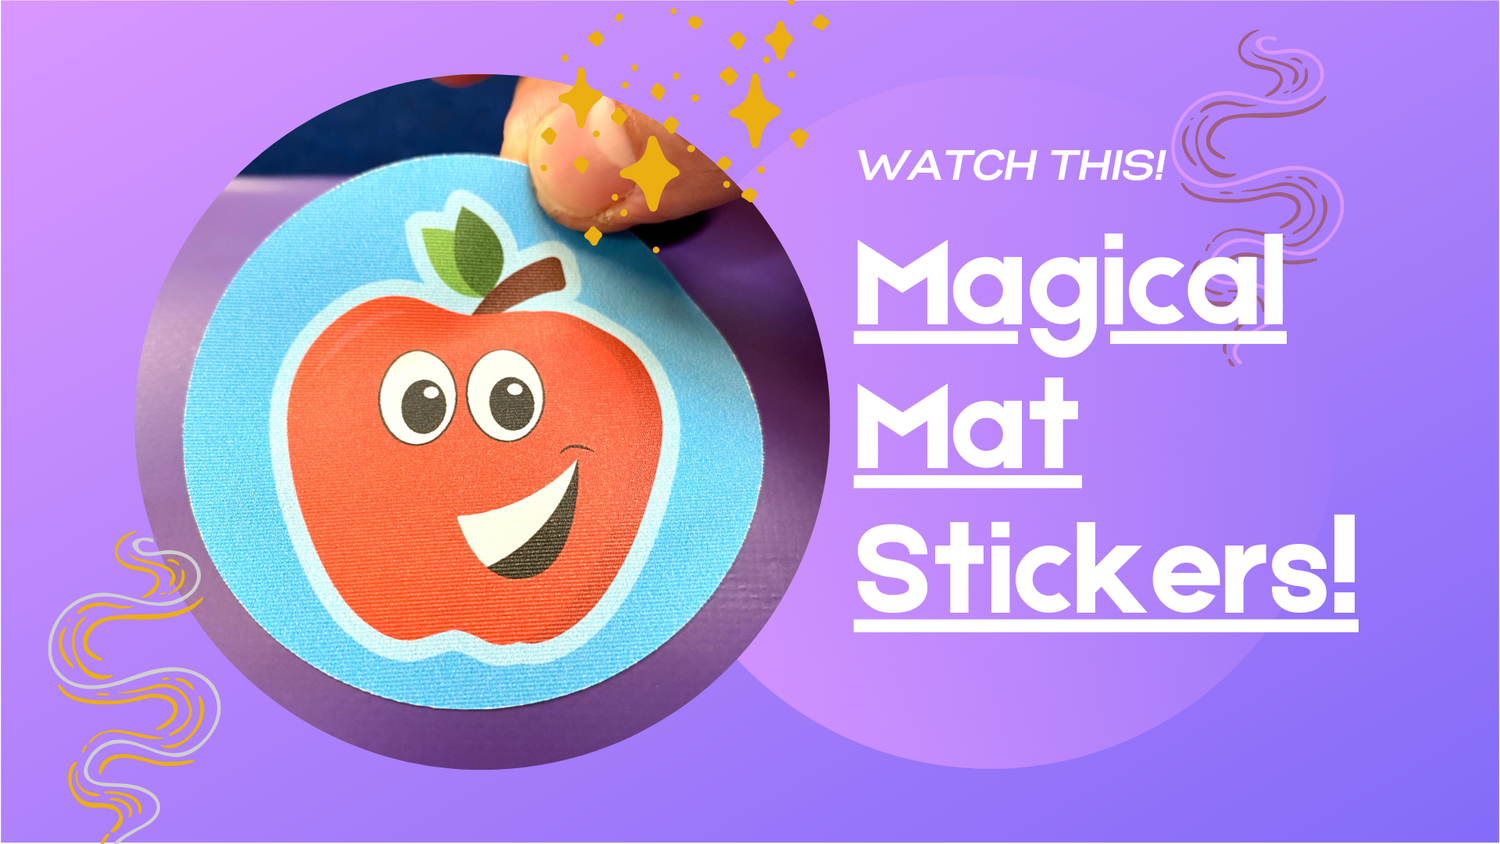 Watch these Stickers in ACTION!